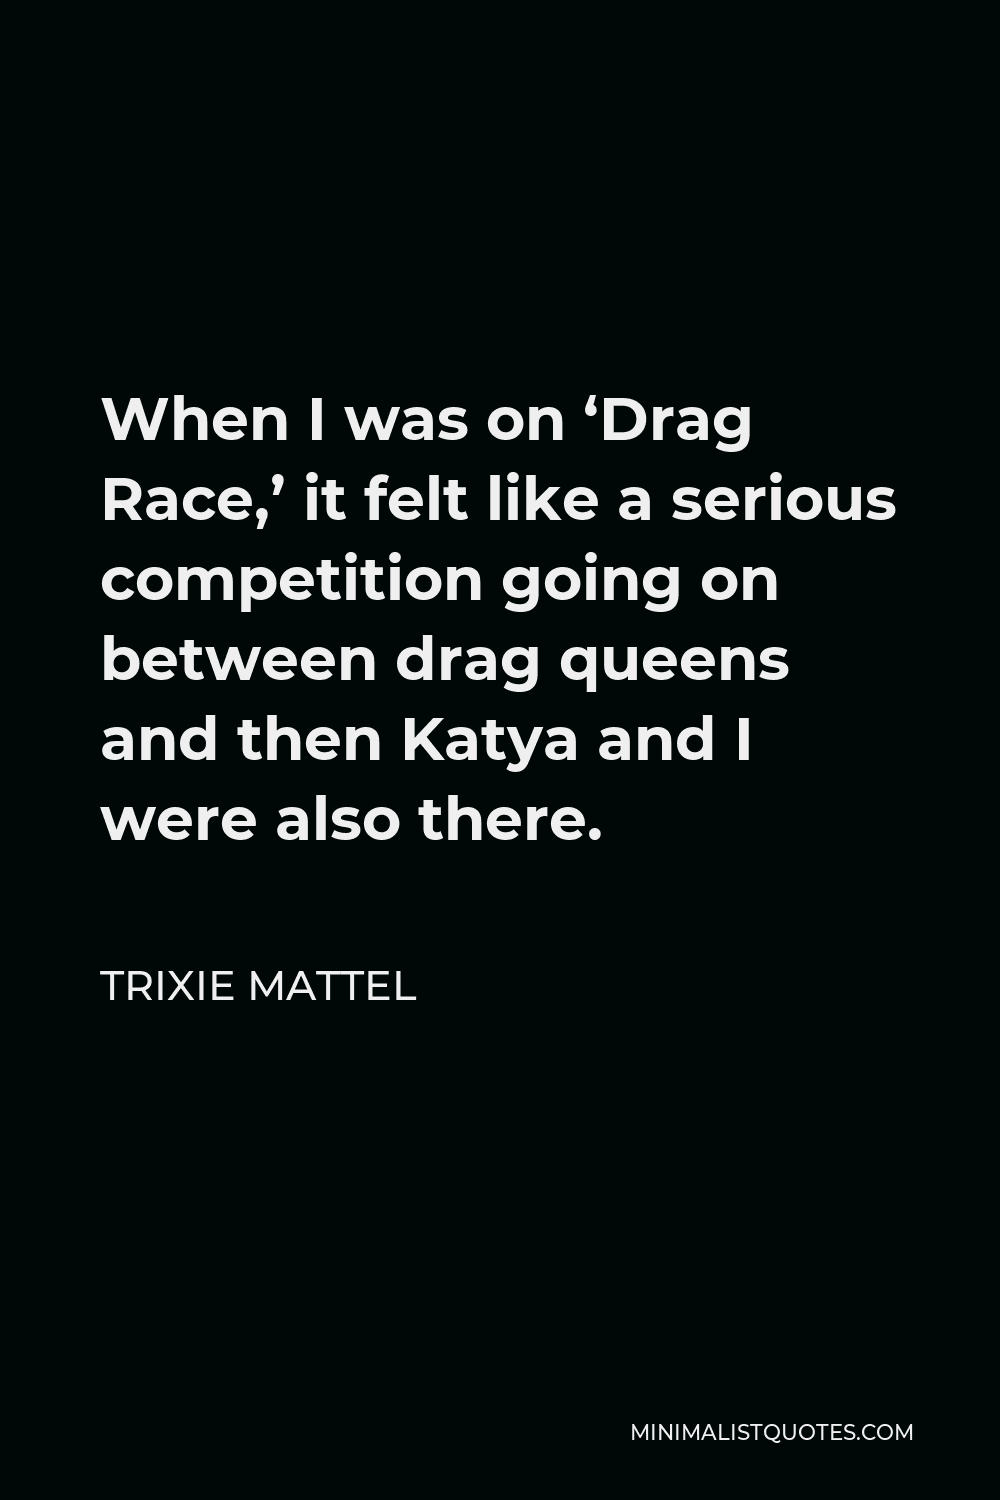 Trixie Mattel Quote - When I was on ‘Drag Race,’ it felt like a serious competition going on between drag queens and then Katya and I were also there.